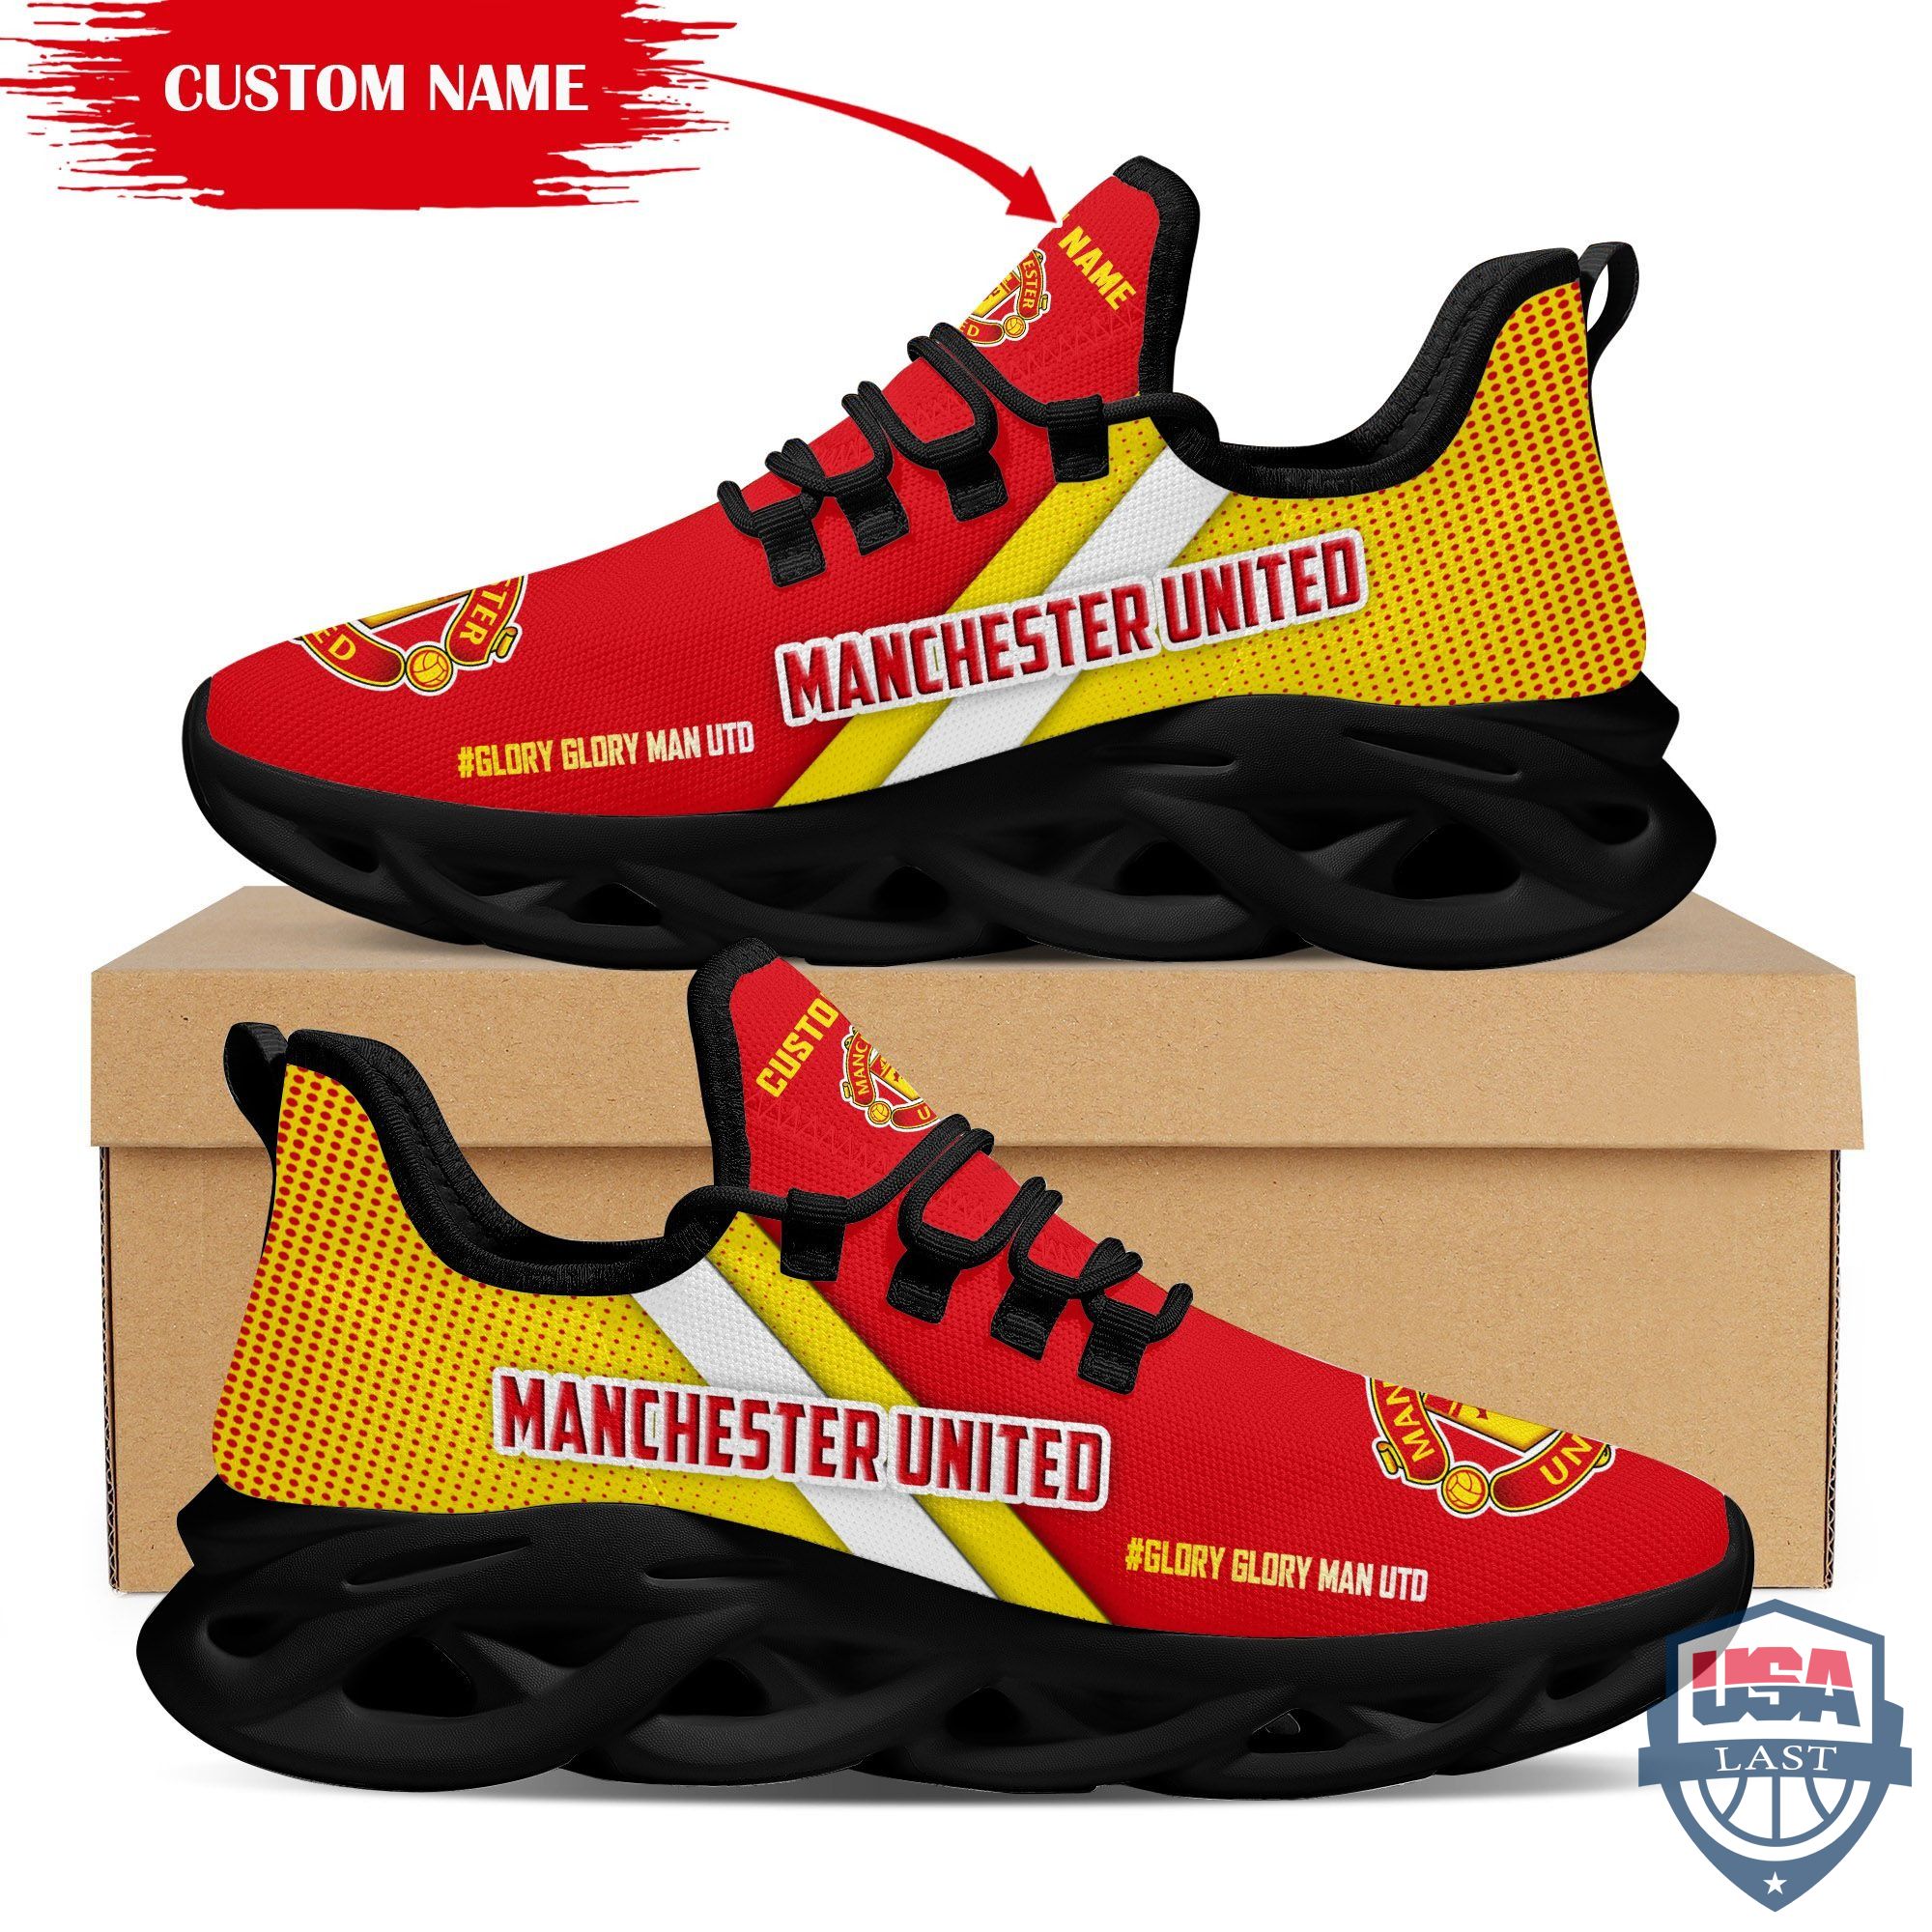 Manchester City Custom Name Max Soul Shoes